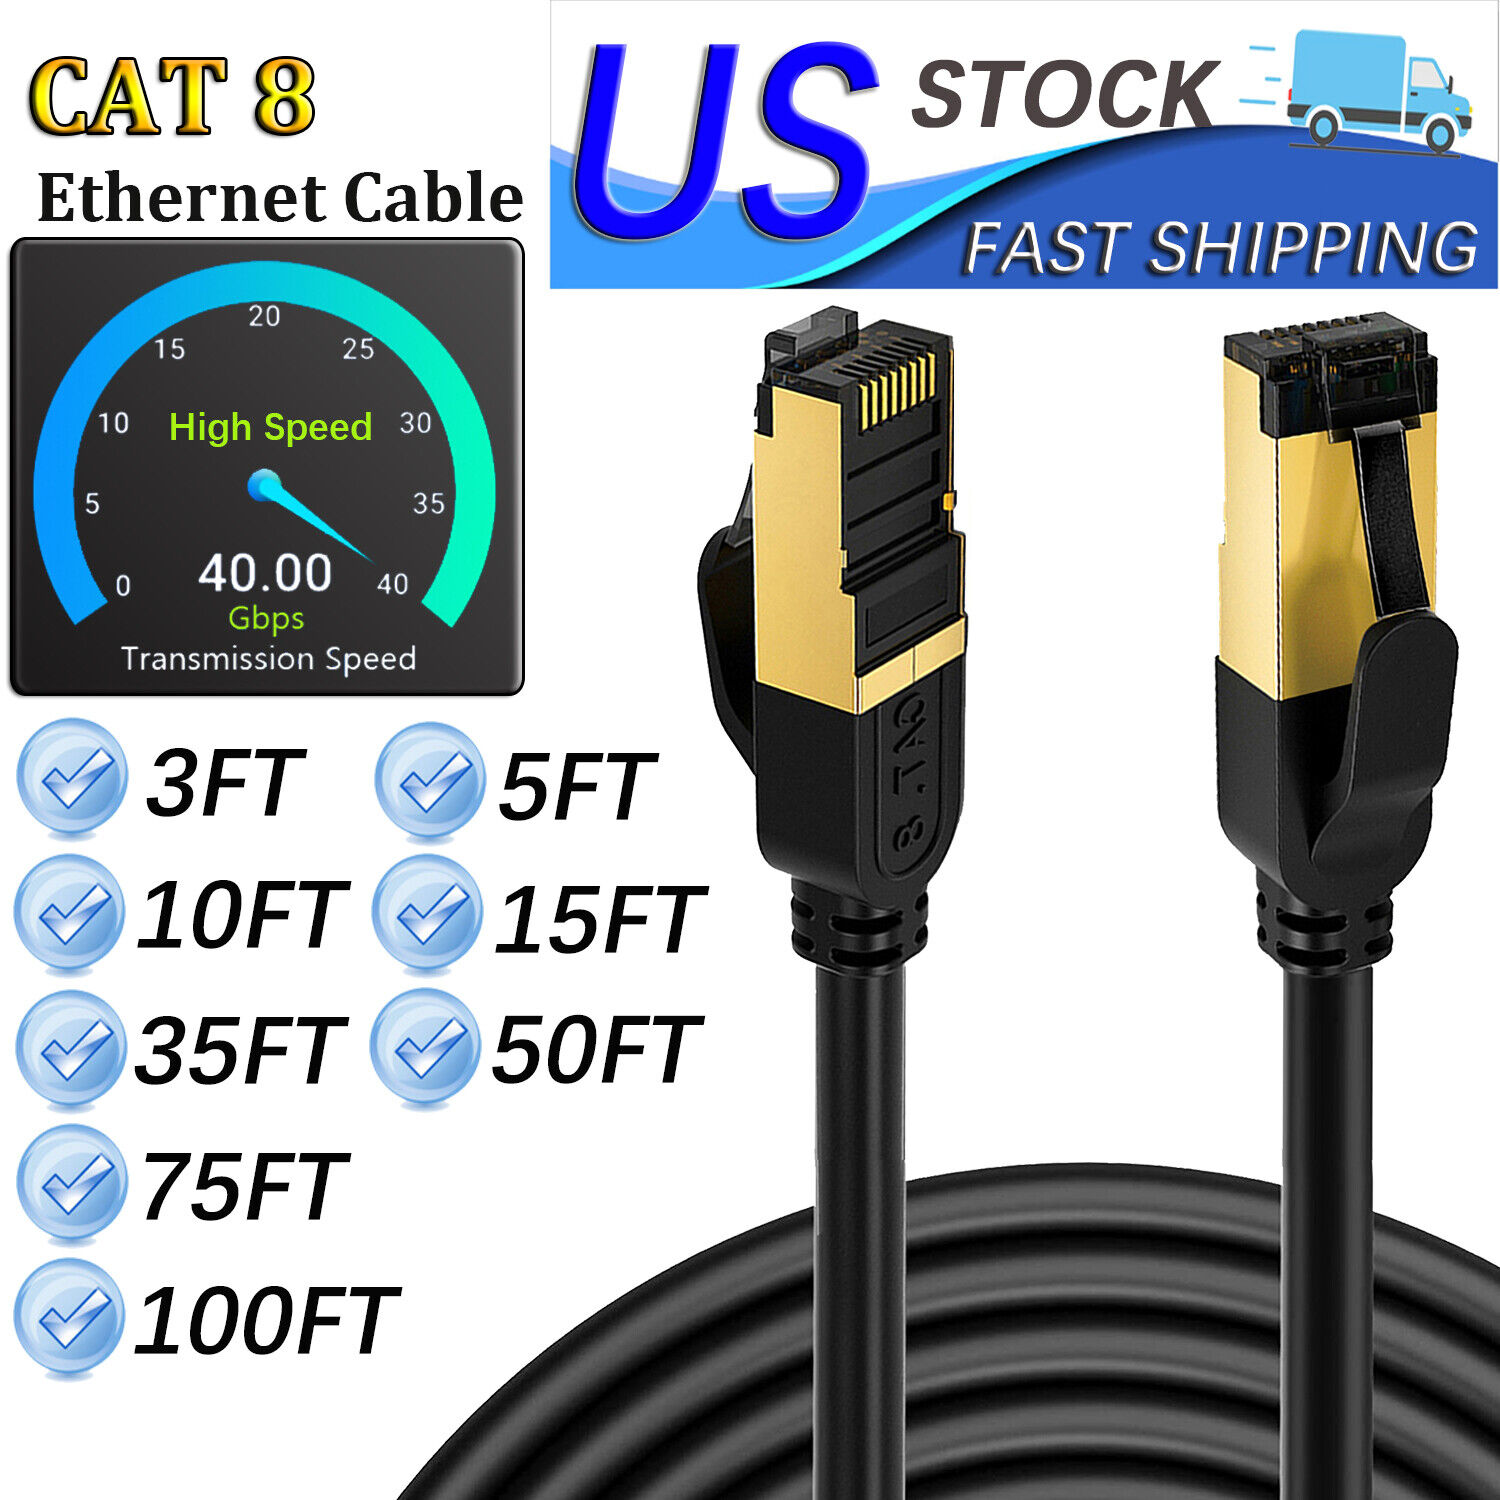 CAT8 RJ45 Ethernet Cable Super Speed 40Gbps Cat 8 Network Cable Gold Plated Lot